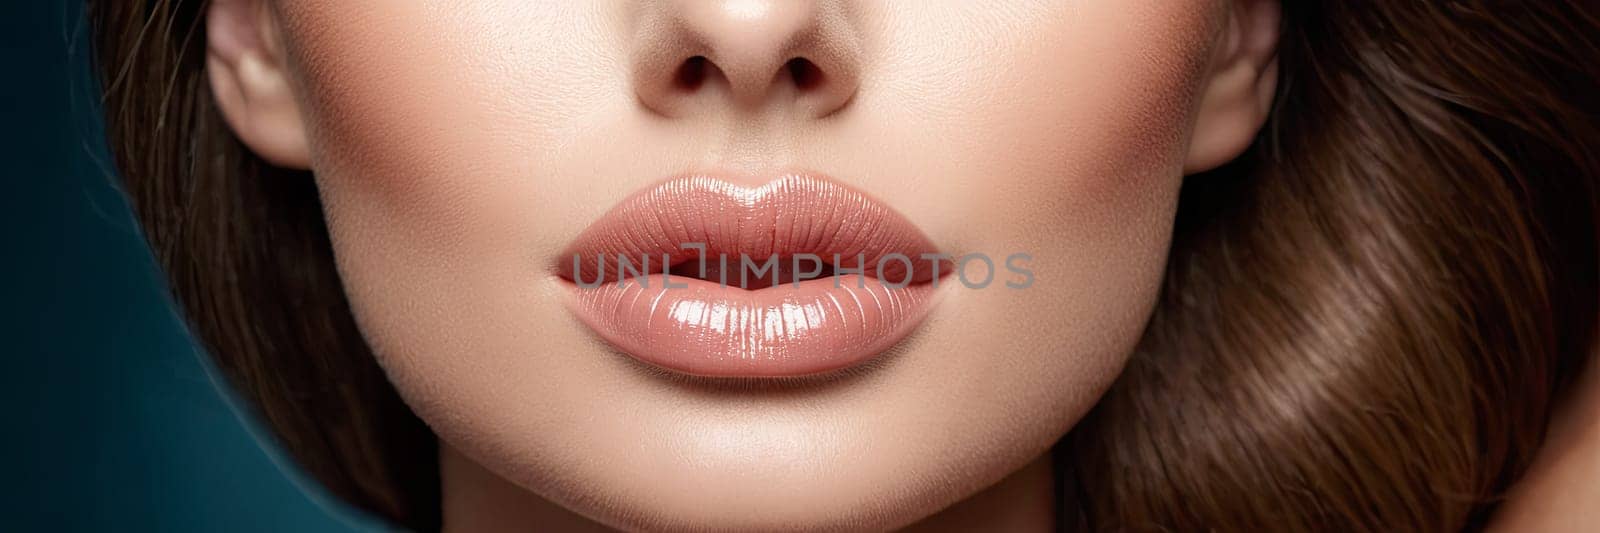 Close-up woman lower face, showcasing clear complexion against a blue background. Image captures detail of skin texture, lips, used for skin care promotion. by Matiunina